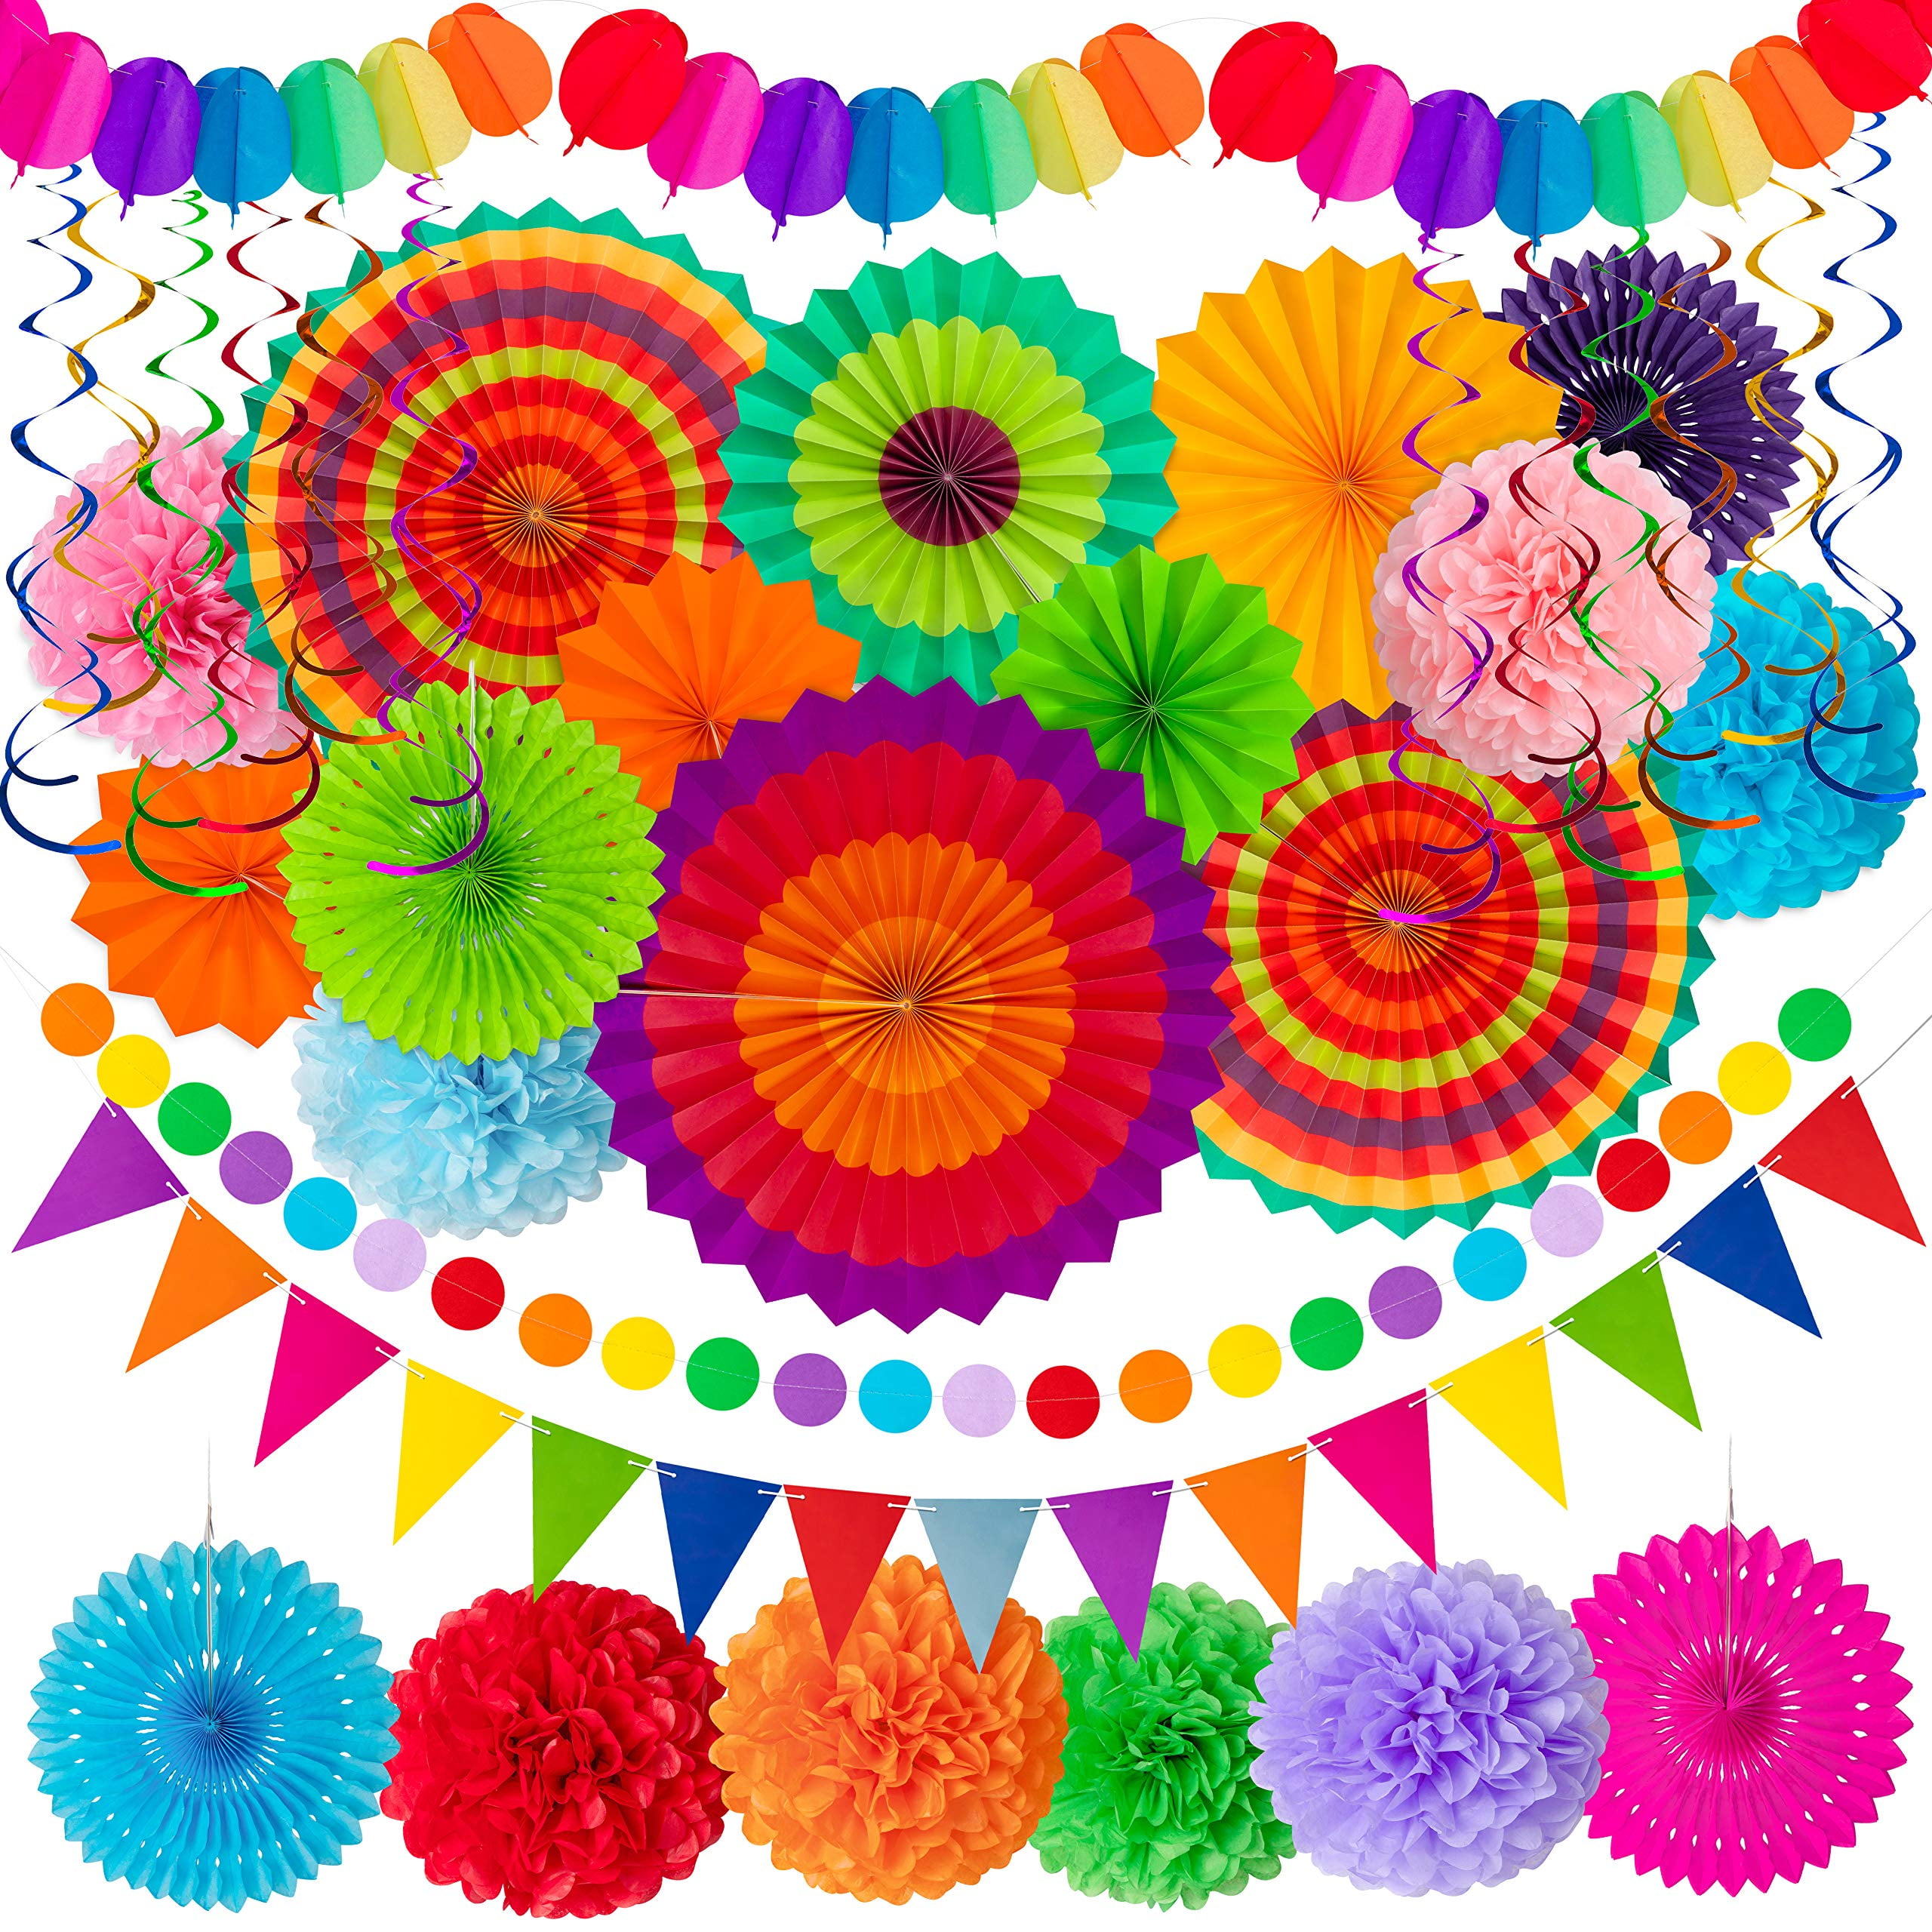 35pcs Fiesta Paper Fan Party Decorations Set - Cinco de Mayo Pom Poms,Pennant,Garland String,Banner,Hanging Swirls Decor SuppliesMulticolored), Size